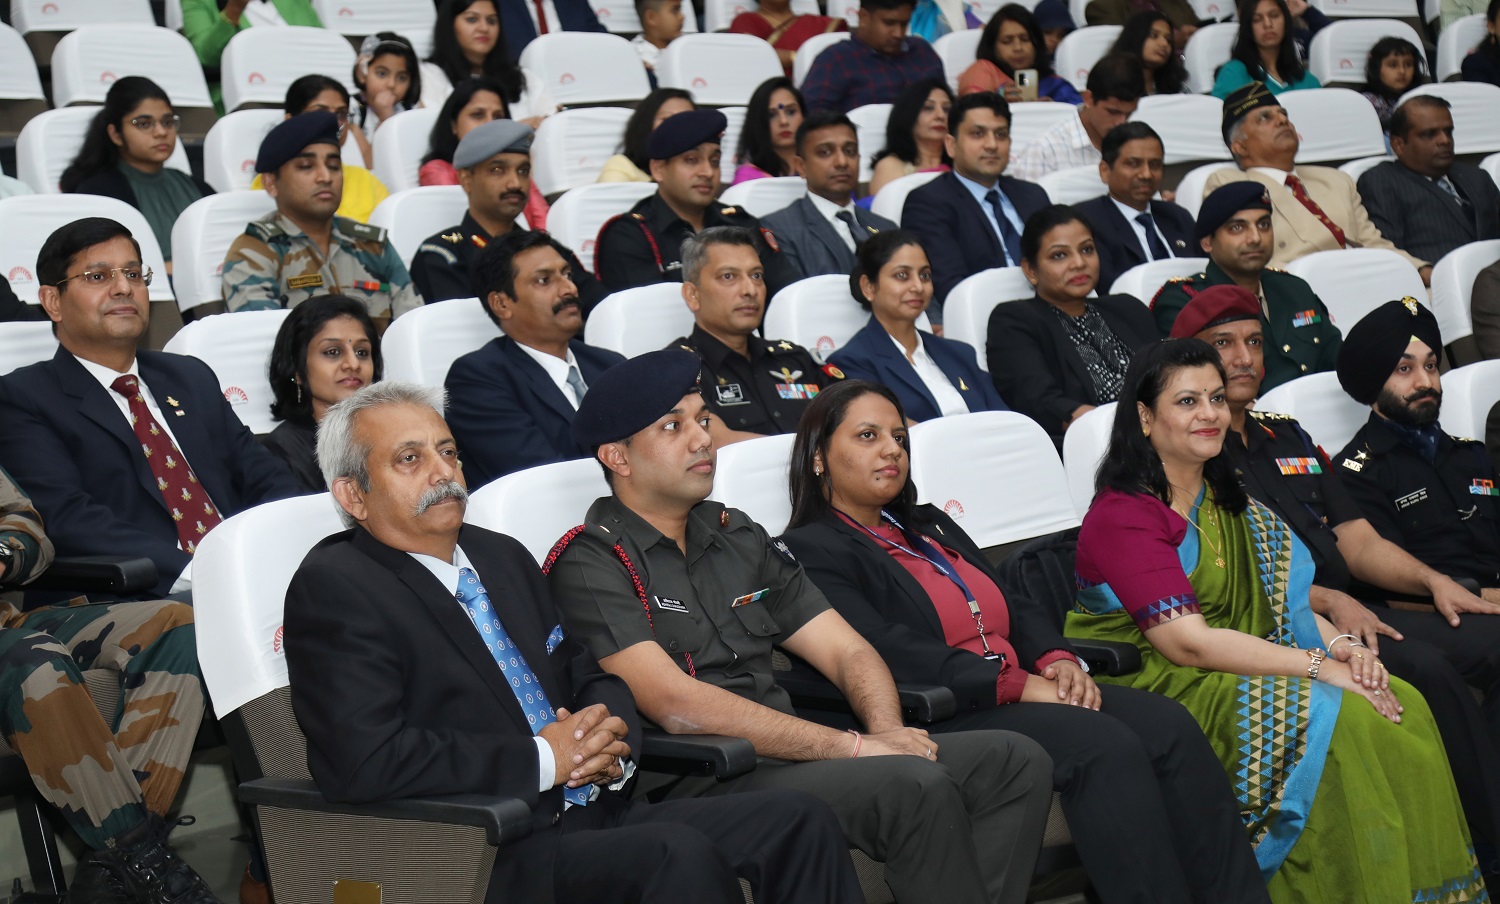 A section of participants at the ceremony.